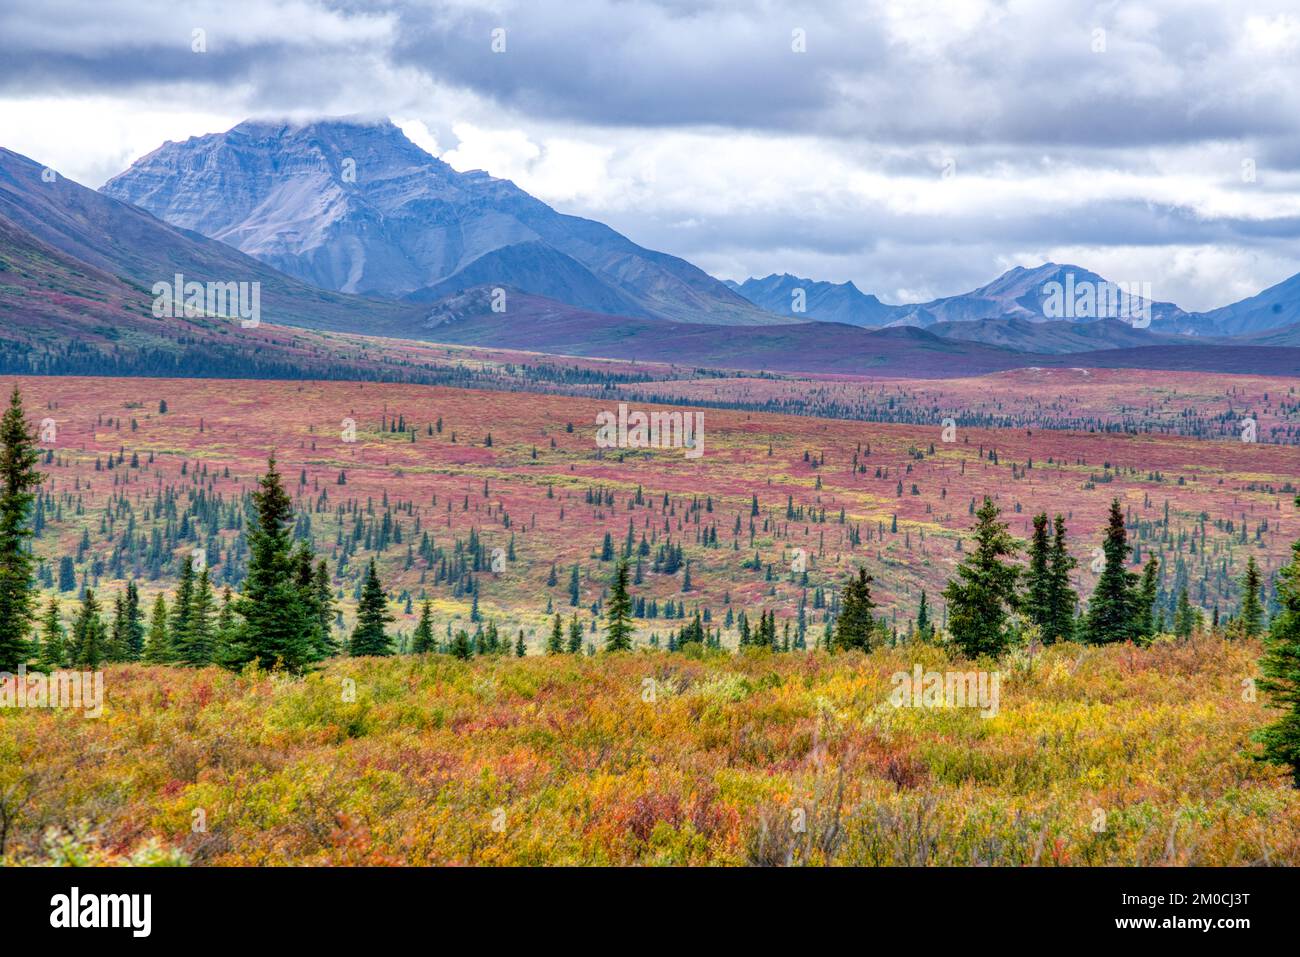 Tundra and mountains in the Savage River valley in Denali National Park, Alaska Stock Photo